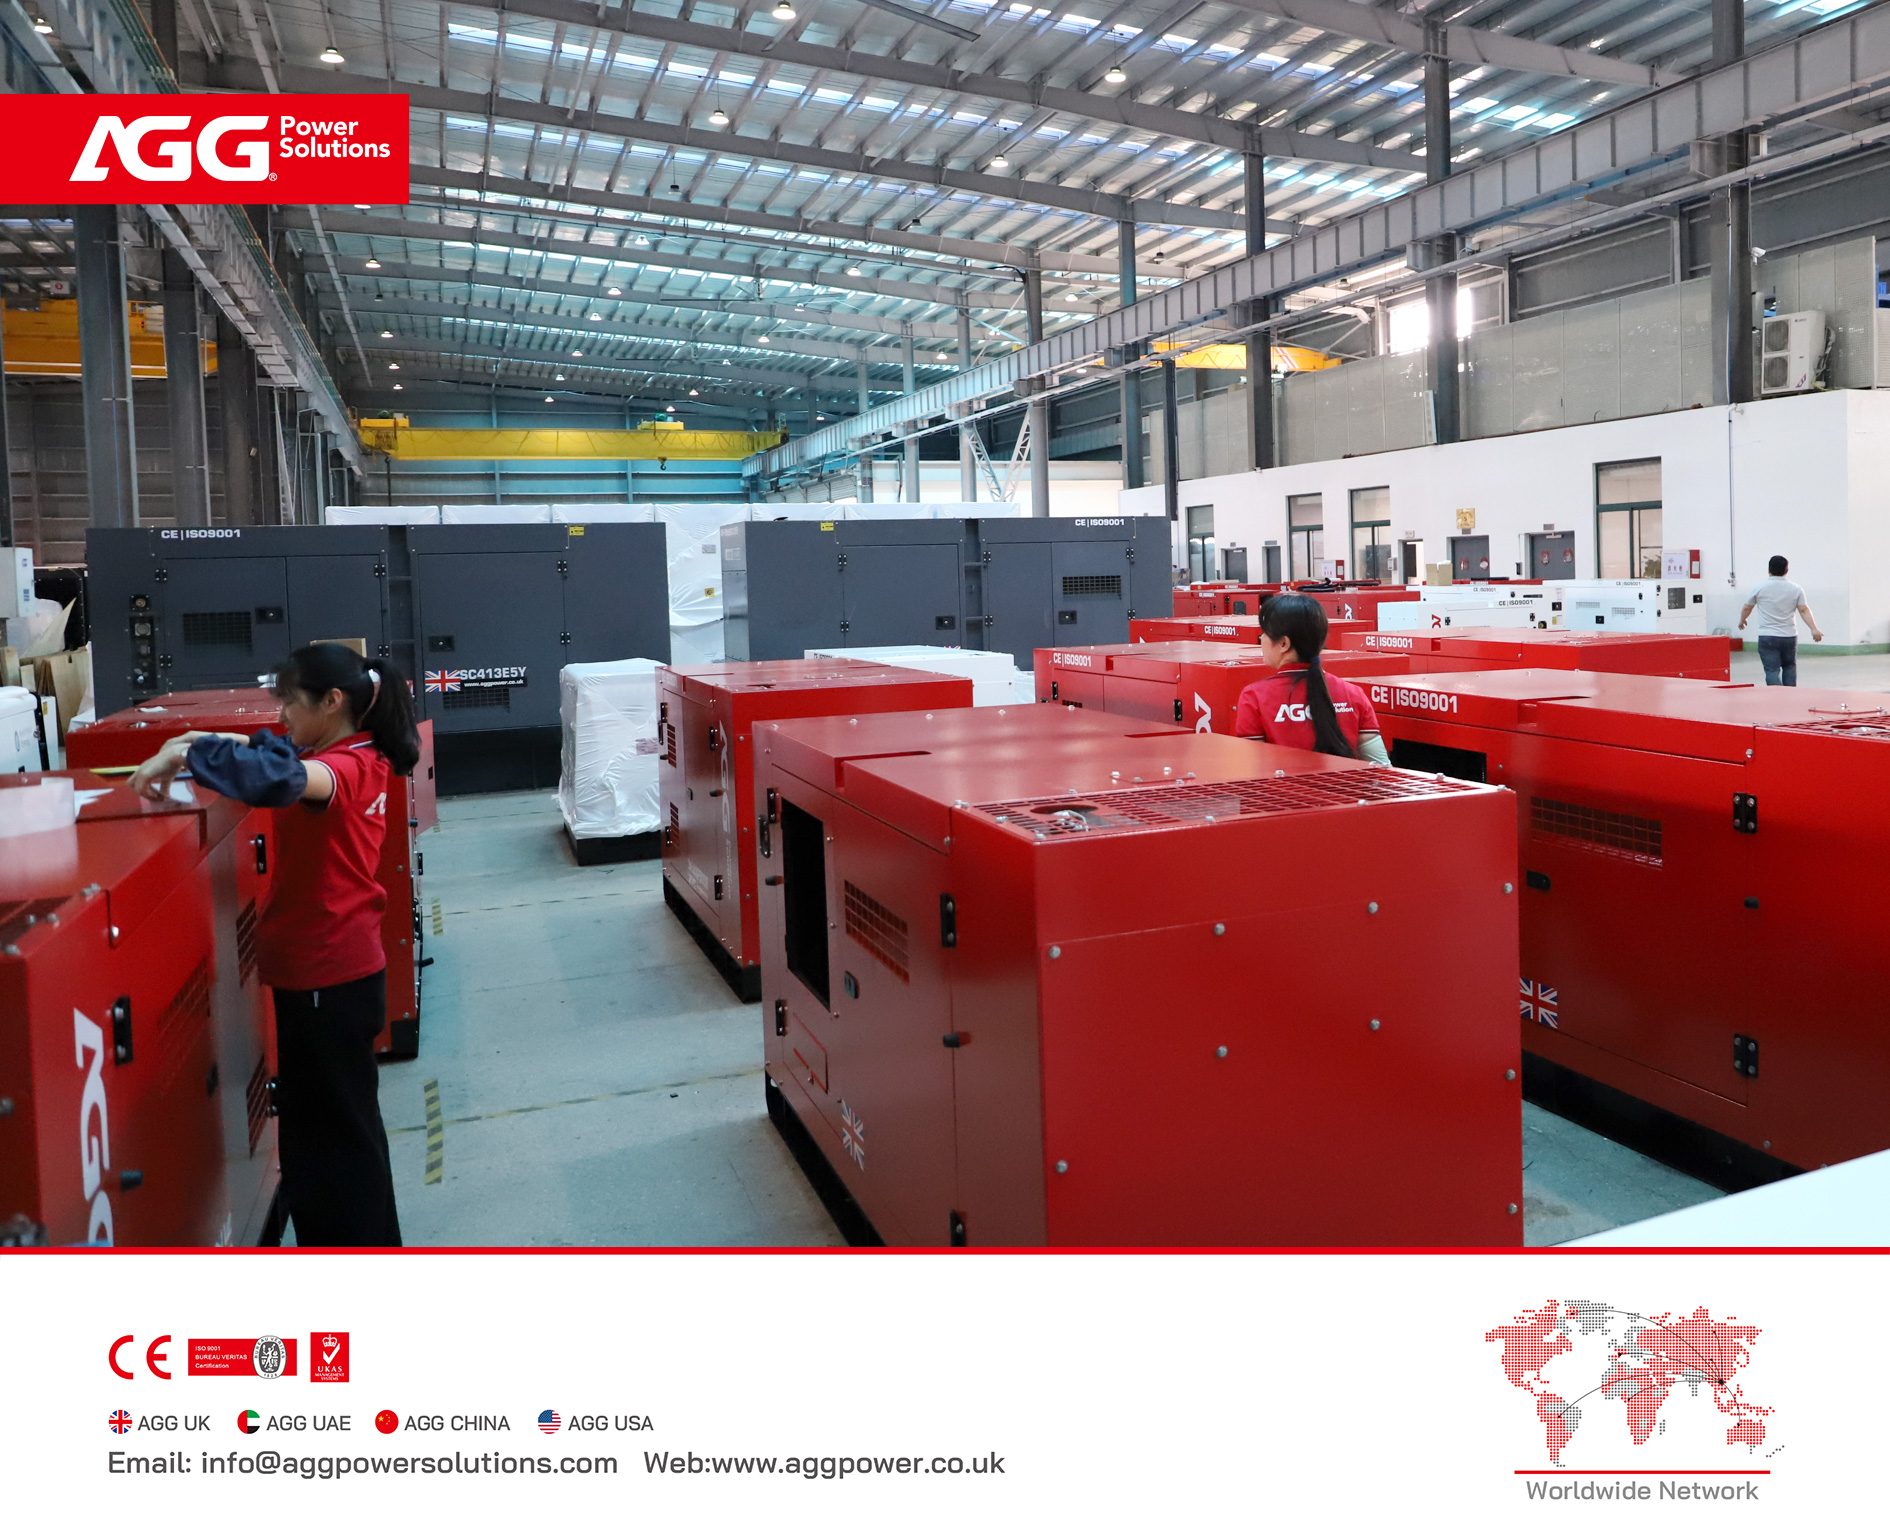 80 AGG Generator Sets Were Shipped to a South American Country to Combat Power Outages